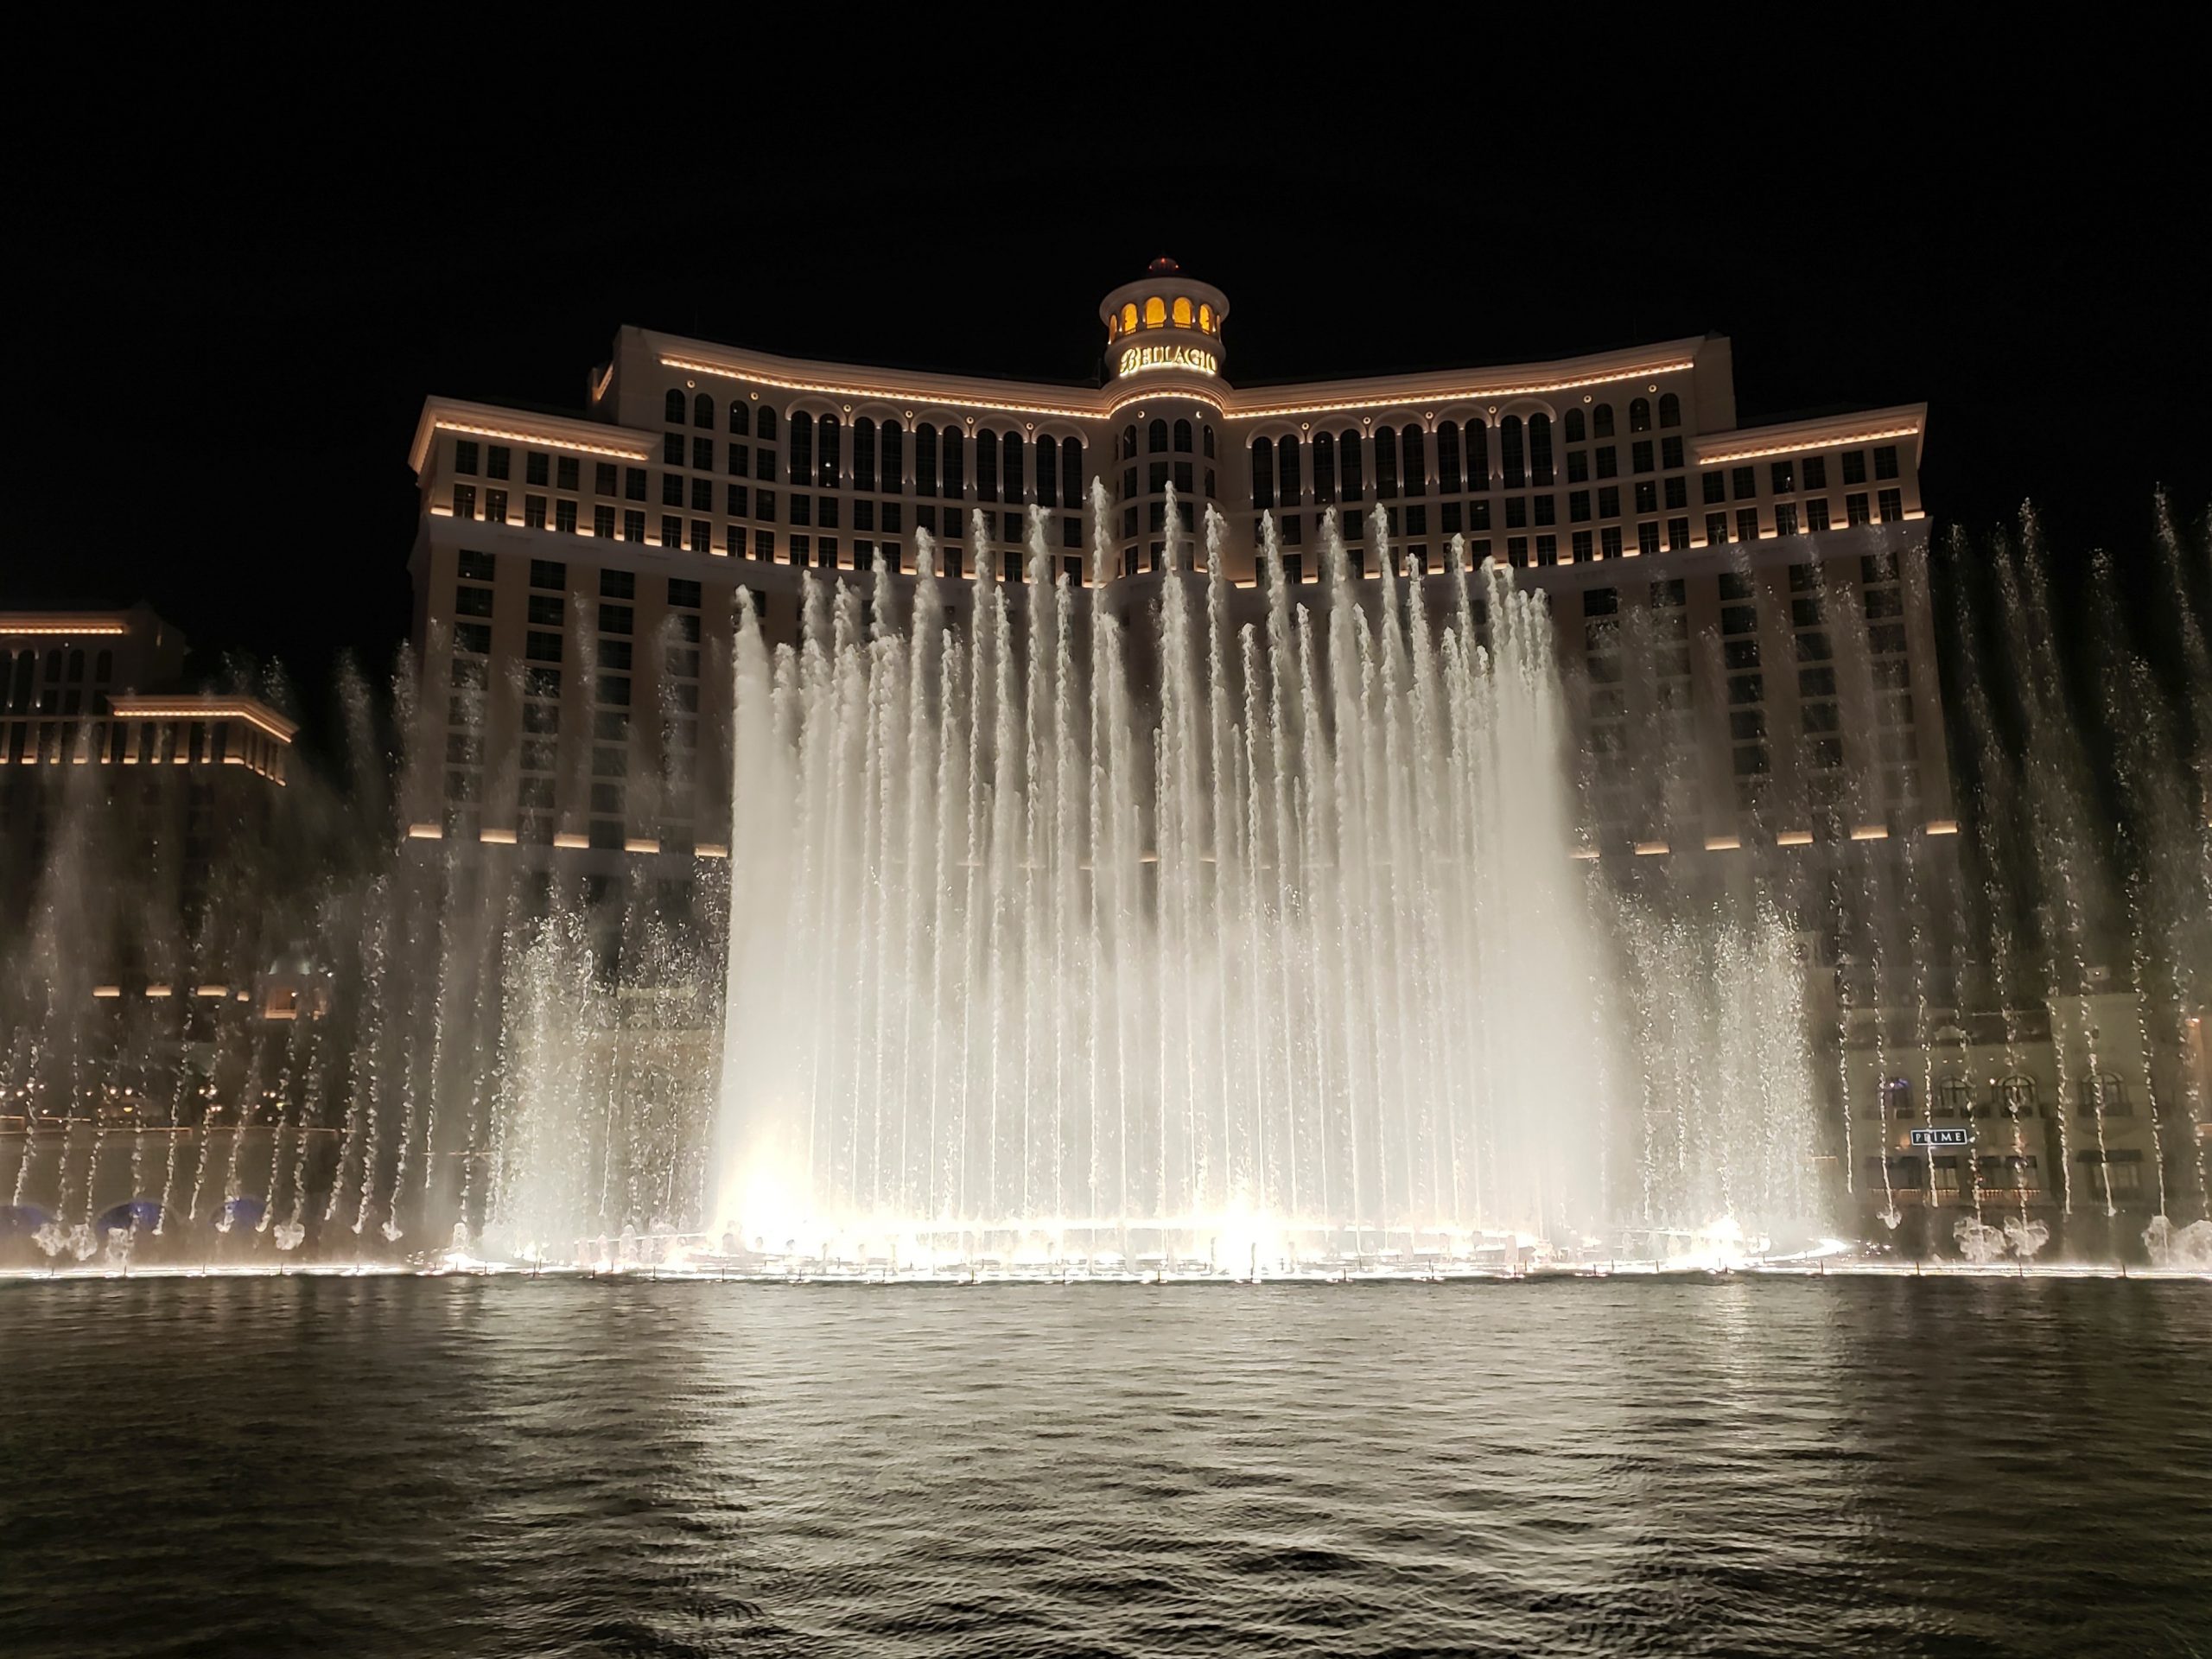 Iconic Bellagio Casino Works Towards Water Conservation - SYNLawn